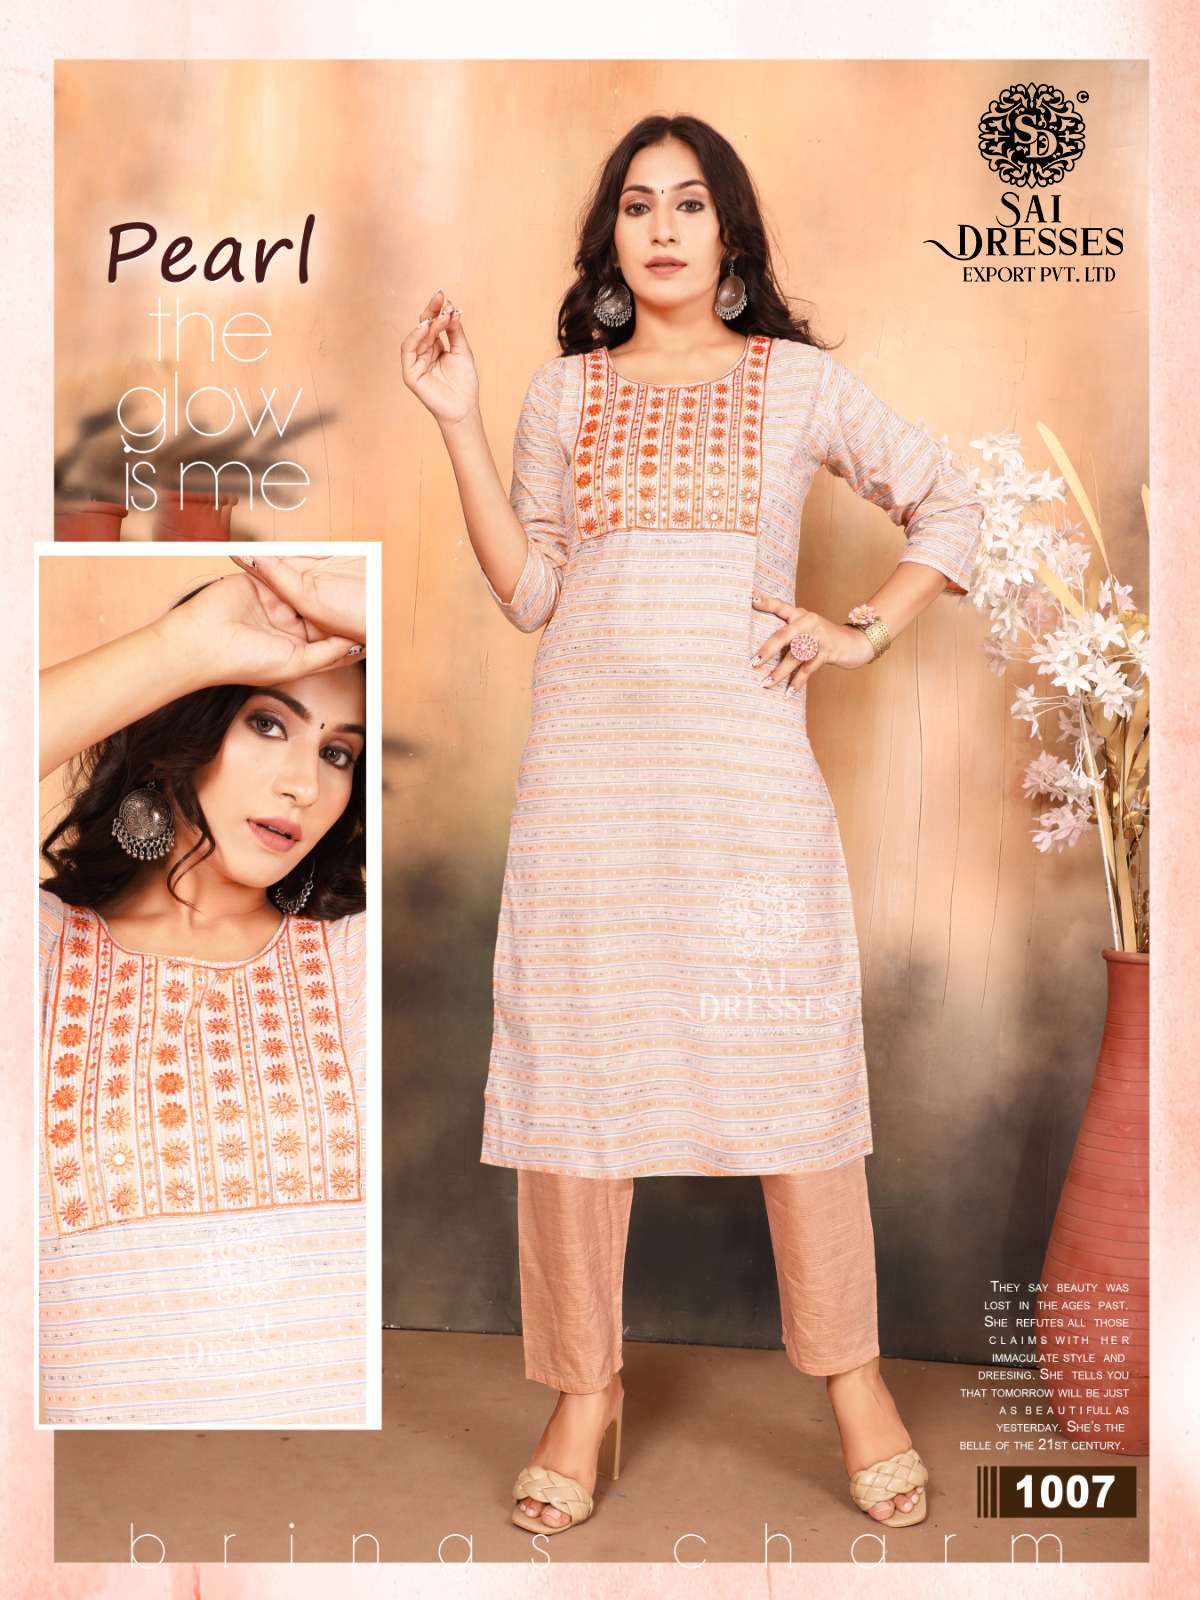 SAI DRESSES PRESENT PEARL READY TO DAILY WEAR STRAIGHT KURTI WITH PANT IN WHOLESALE RATE IN SURAT